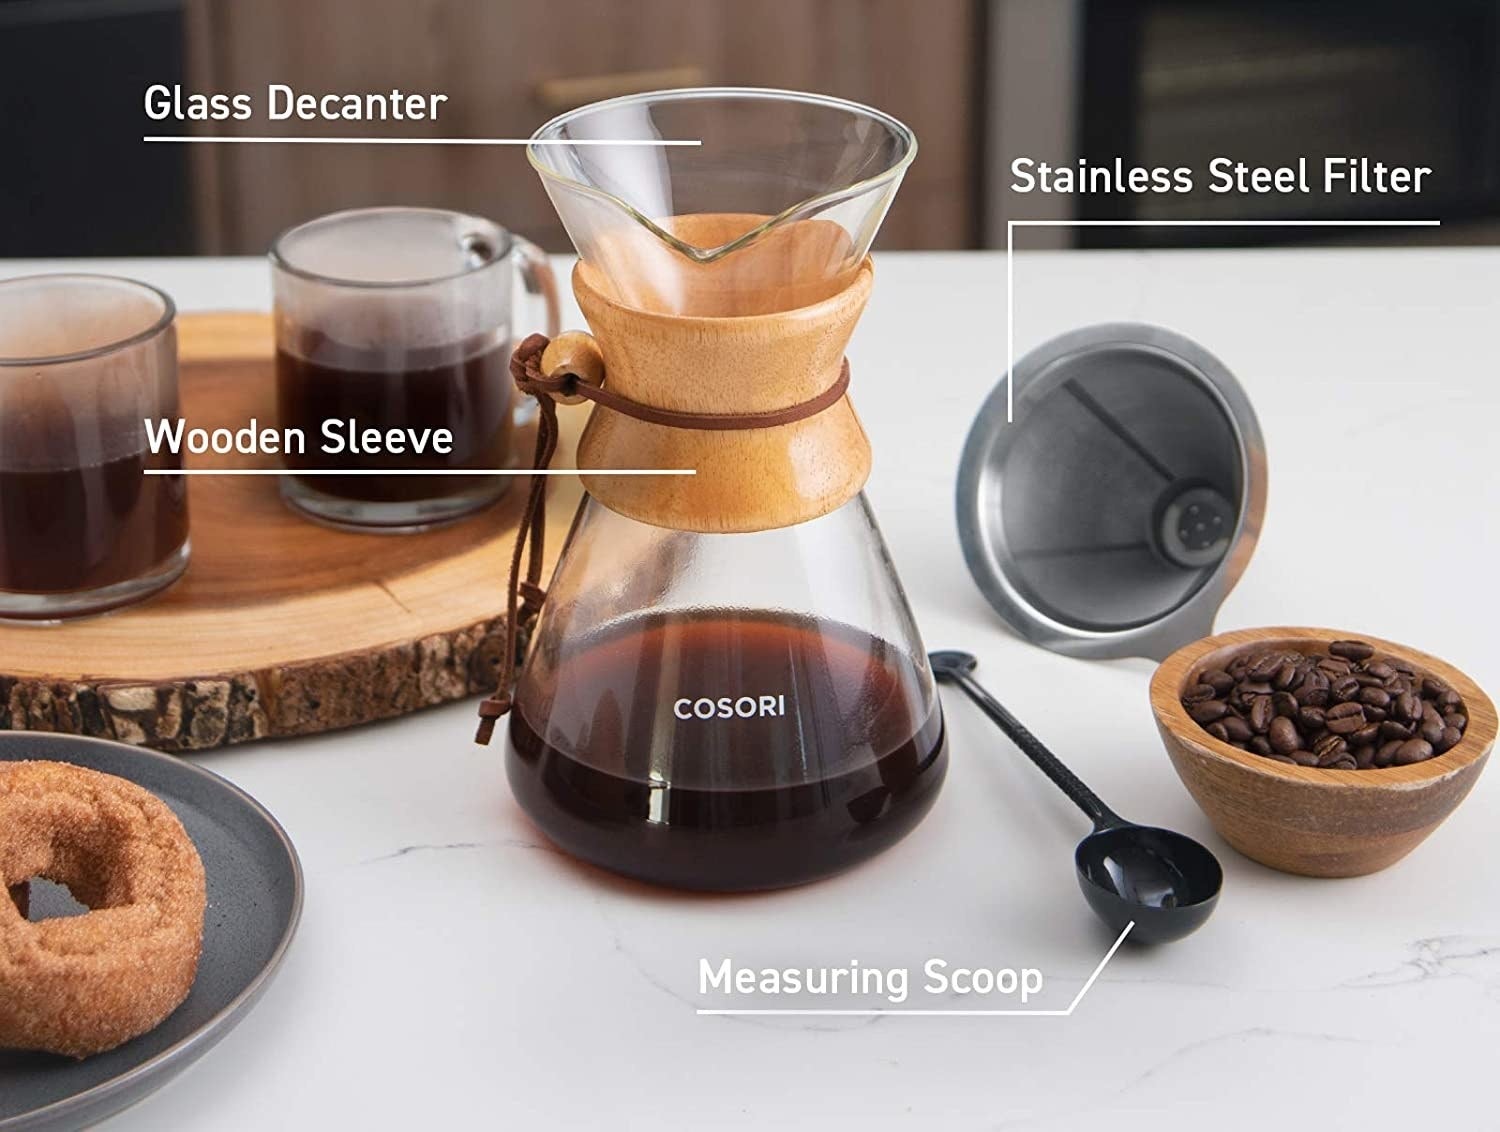 The pour over coffee decanter surrounded by all its accessories